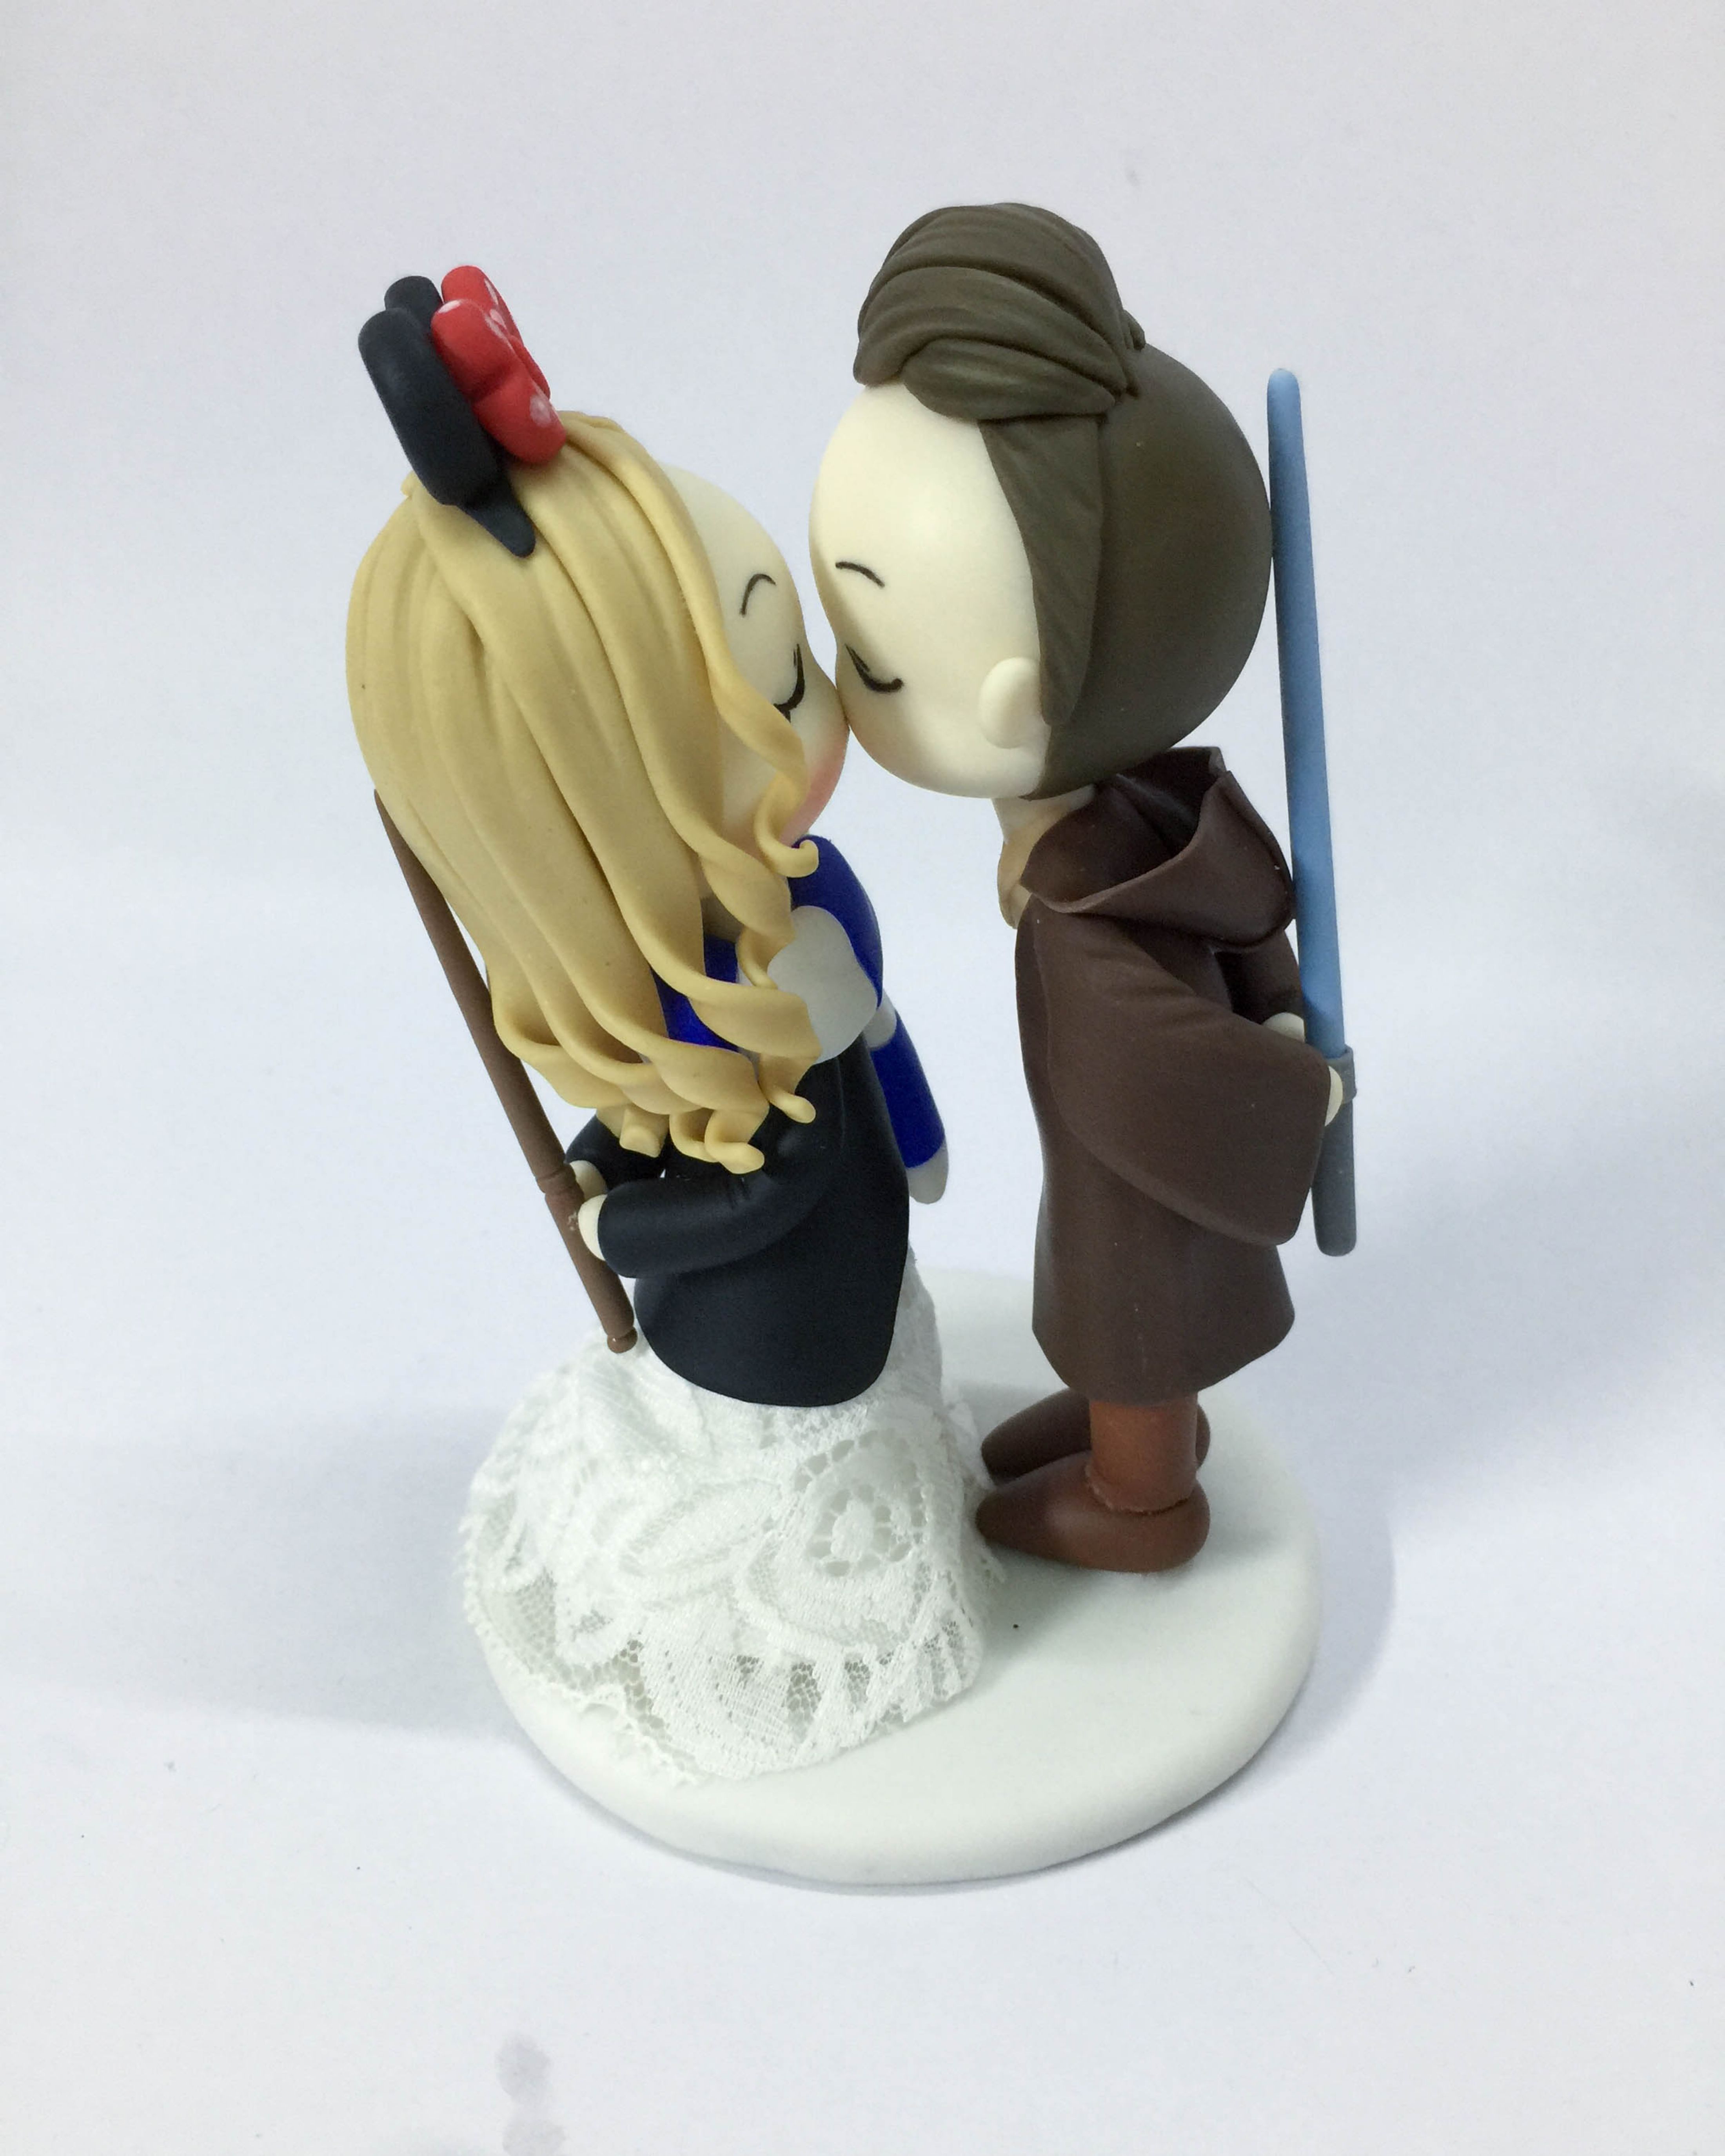 Picture of Han Solo Groom And Ravenclaw Bride Wedding Cake Topper, Harry Potter inspire wedding theme, Disney wedding theme and Star wars wedding topper